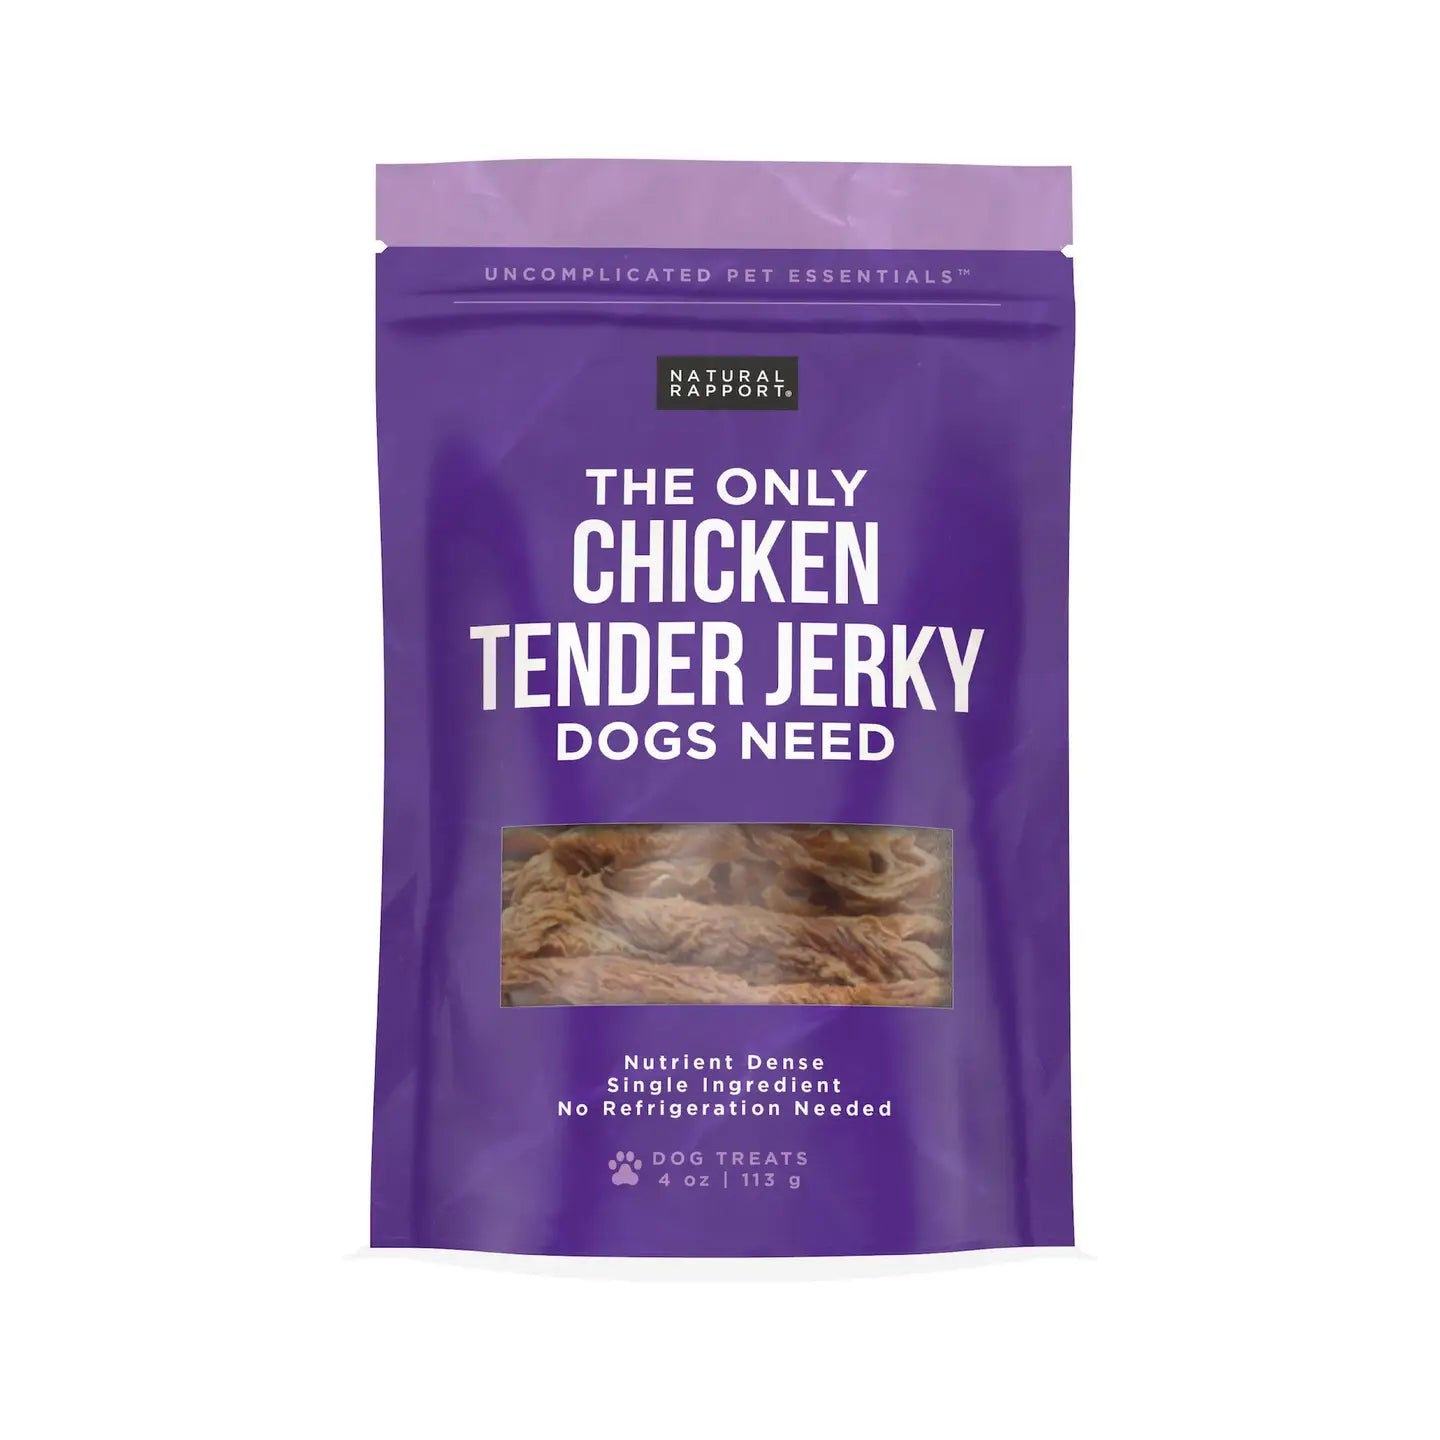 The Only Chicken Tender Jerky Dogs Need